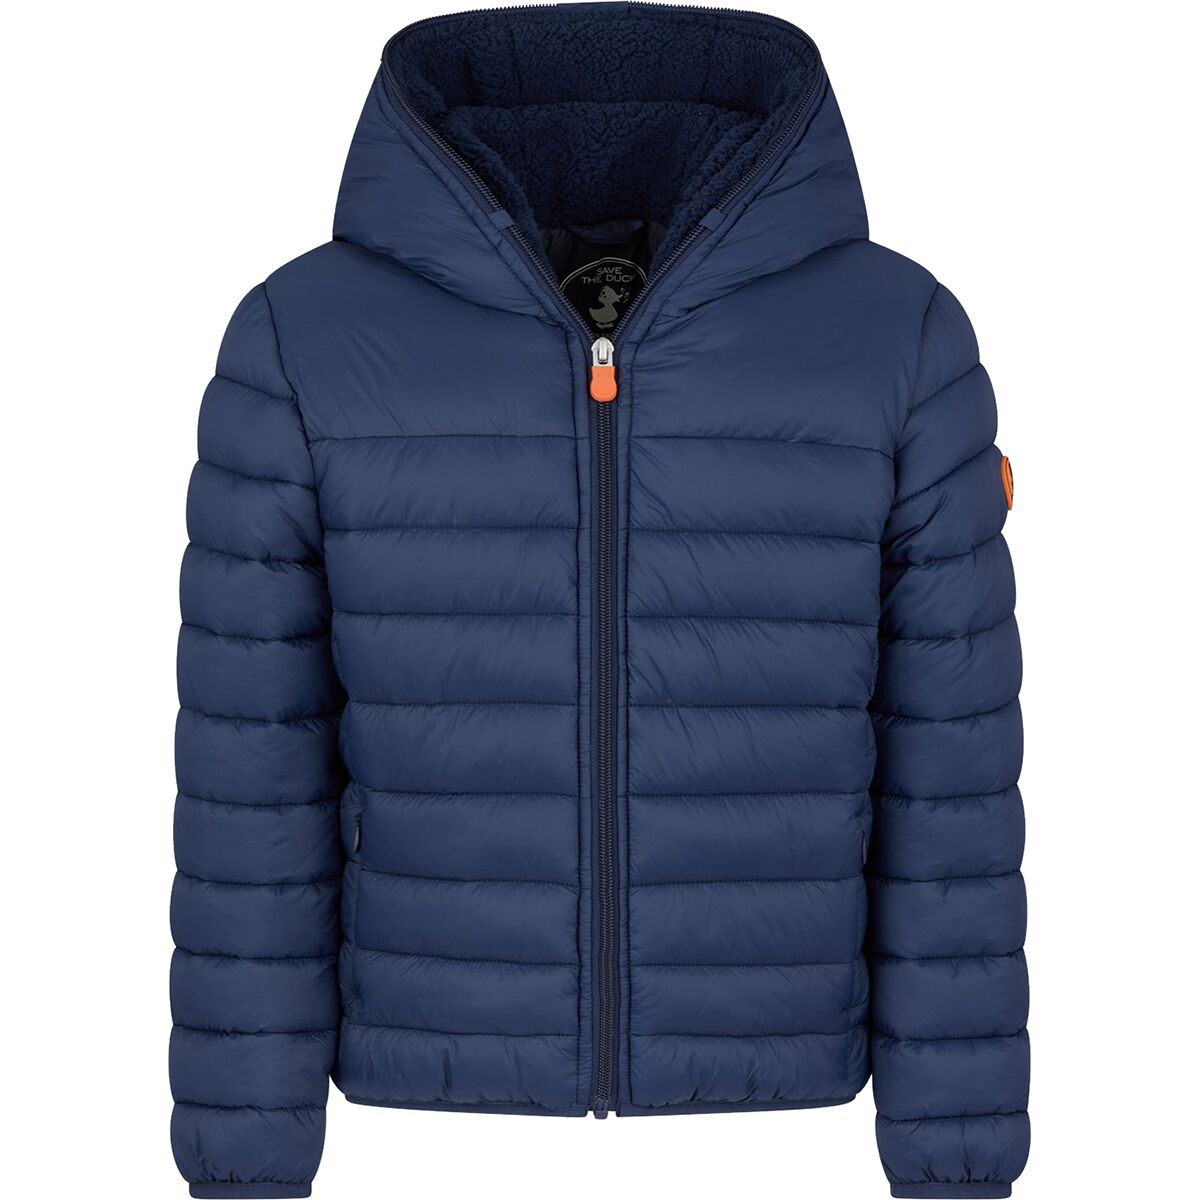 Save The Duck Rob Jacket - Toddler Boys'